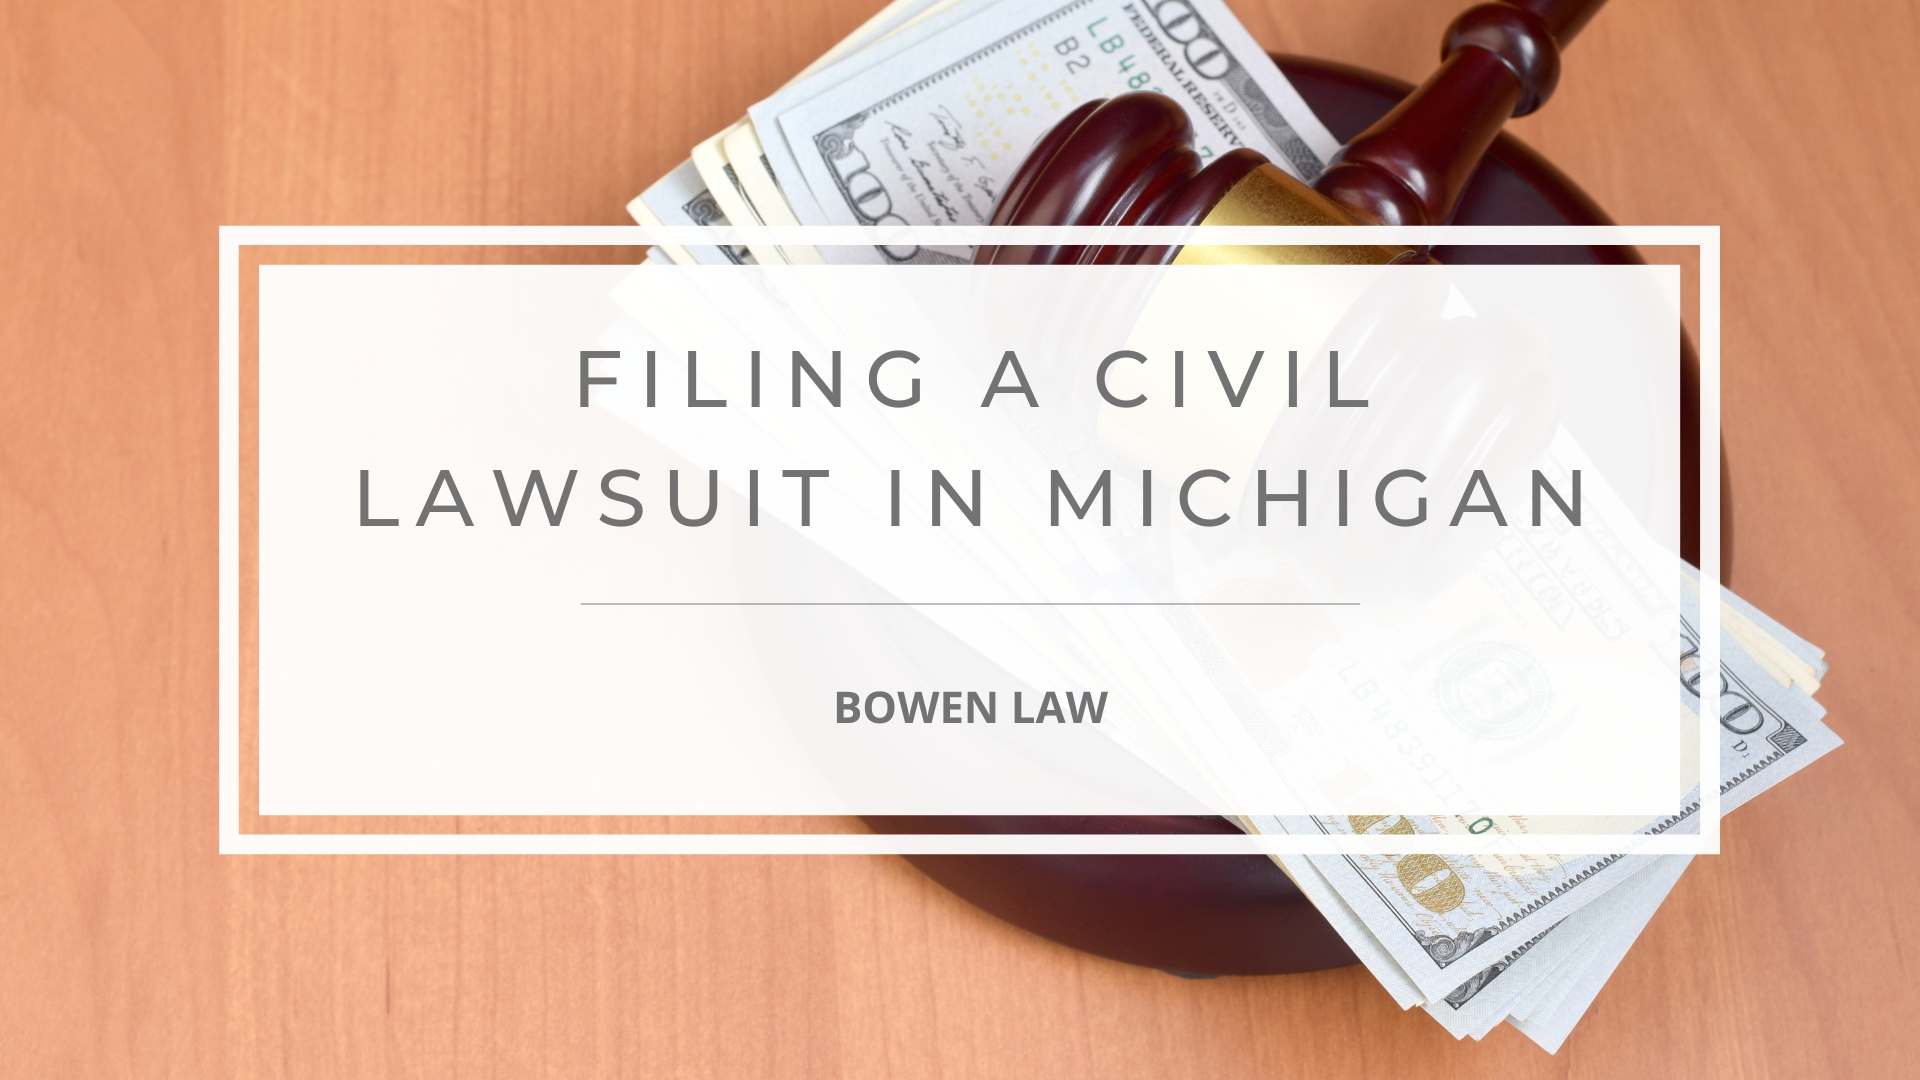 Featured image of filing a civil lawsuit in Michigan